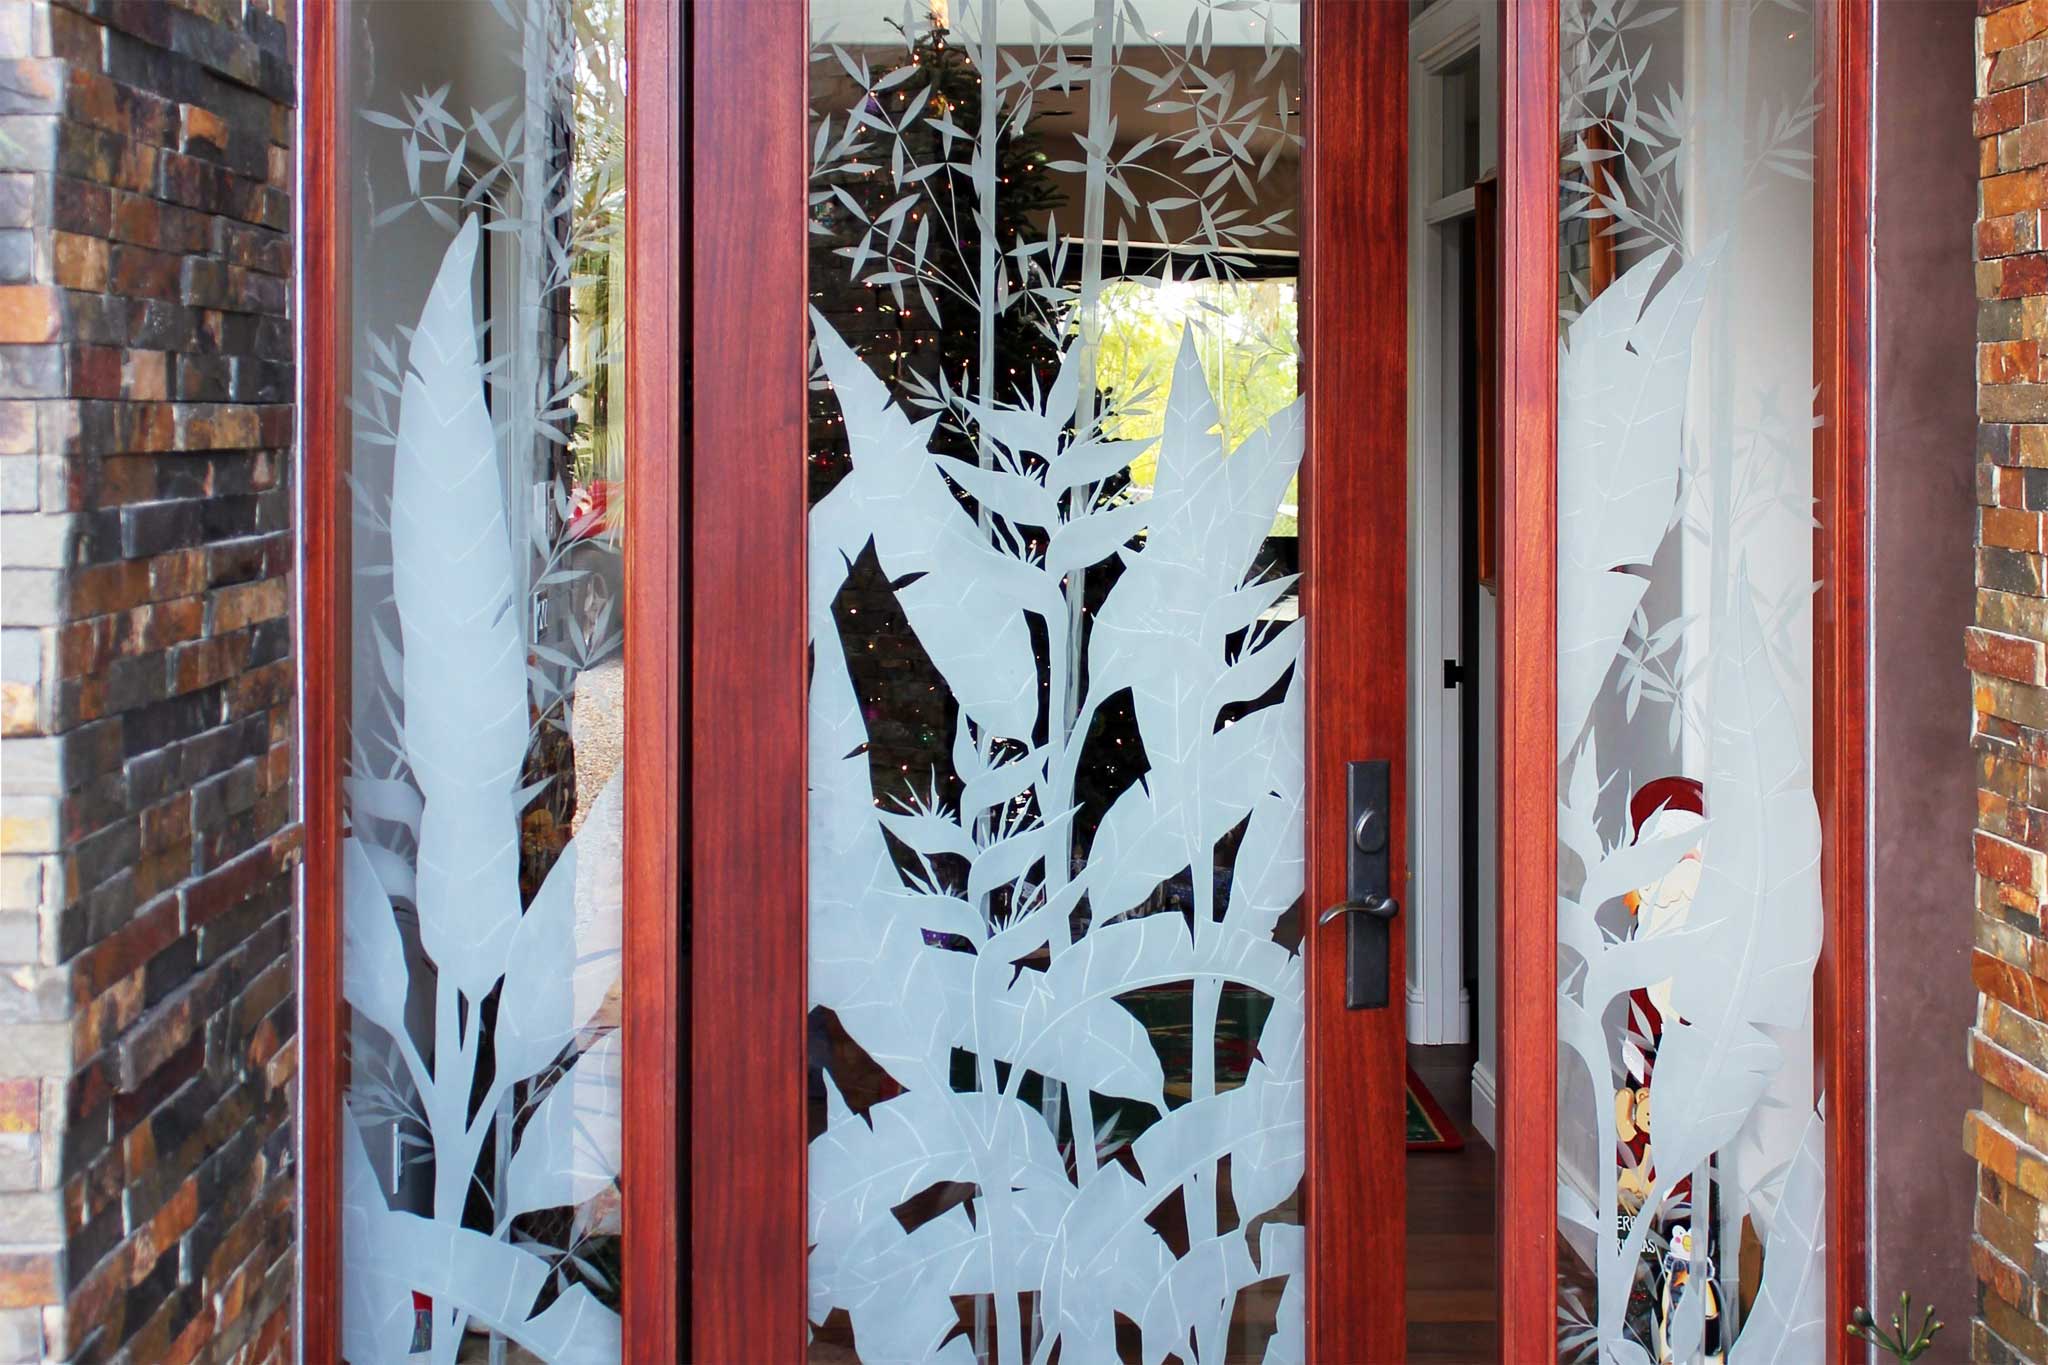 Sandblasted and Etched Glass Designs for Doors, Windows, Signage, Room Dividers, and More